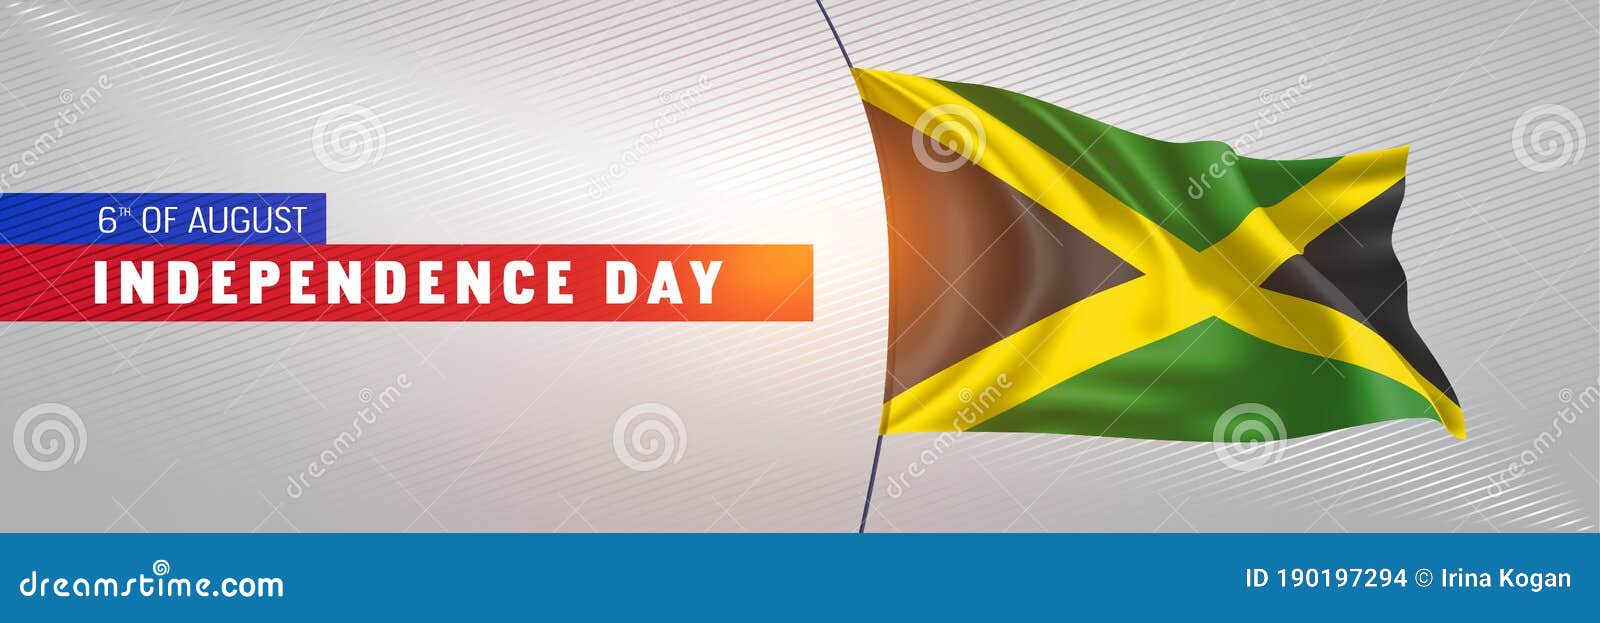 Jamaica Happy Independence Day Greeting Card, Banner Vector ...